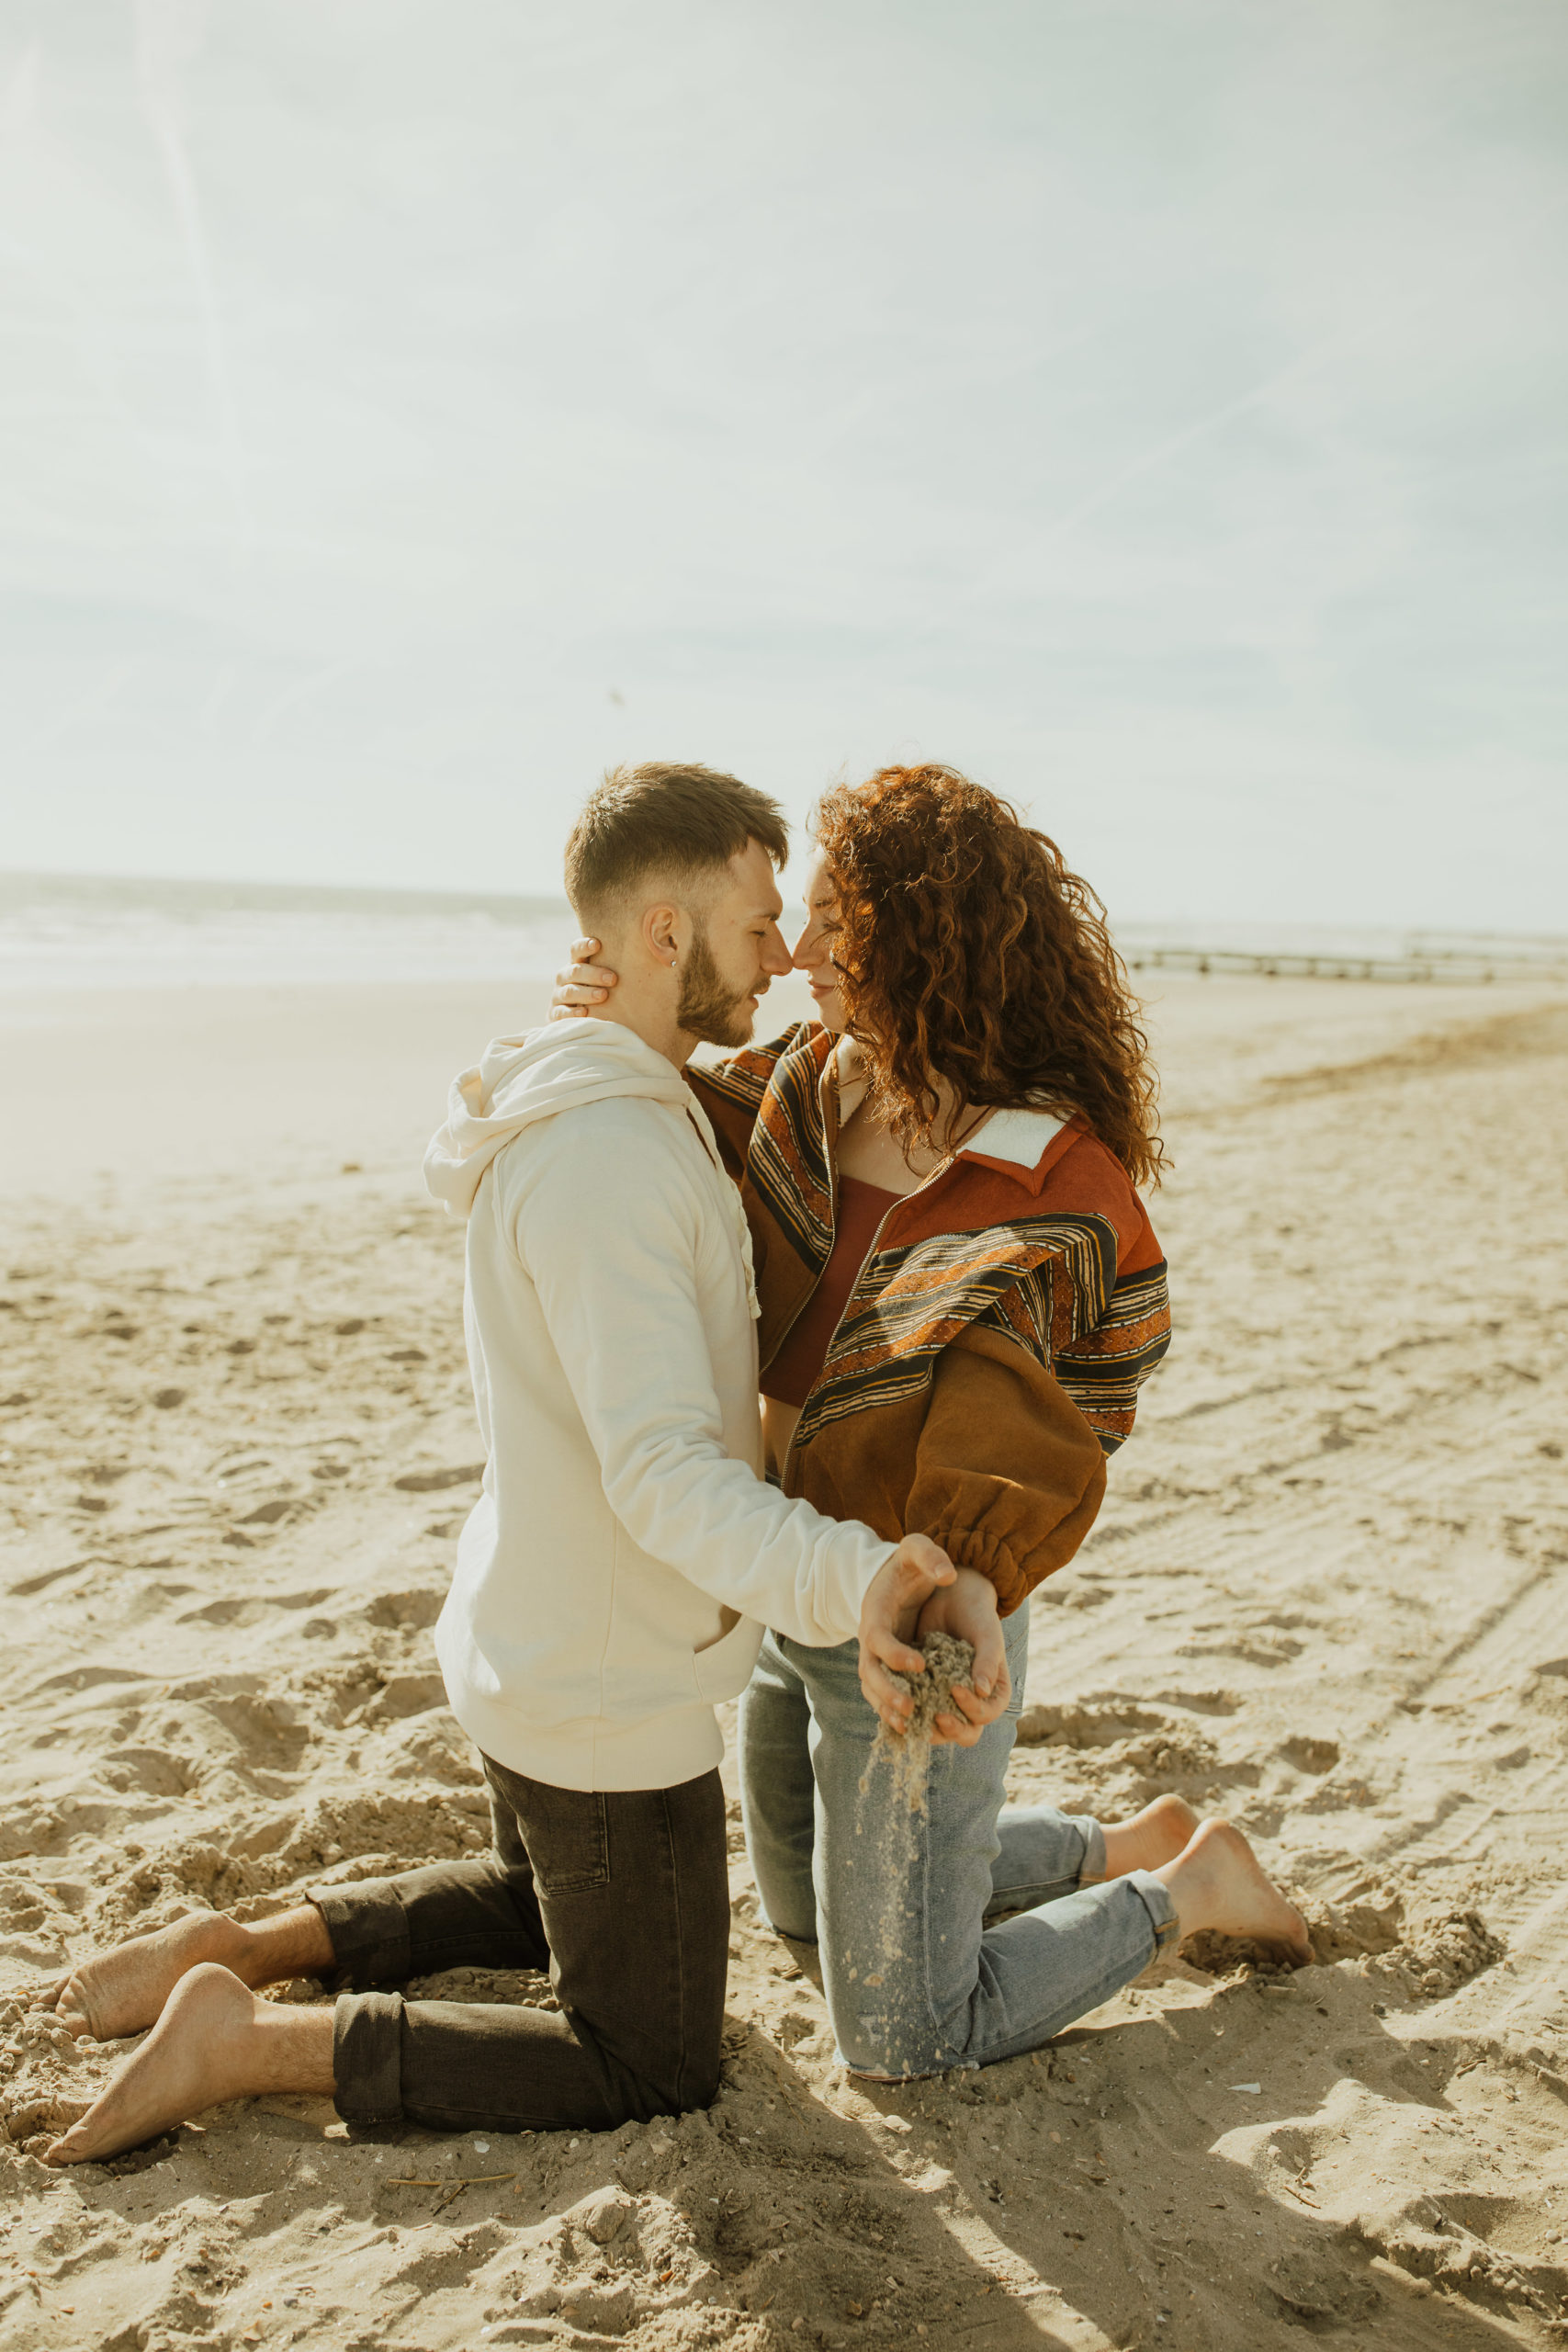 An engagement photoshoot at the beach